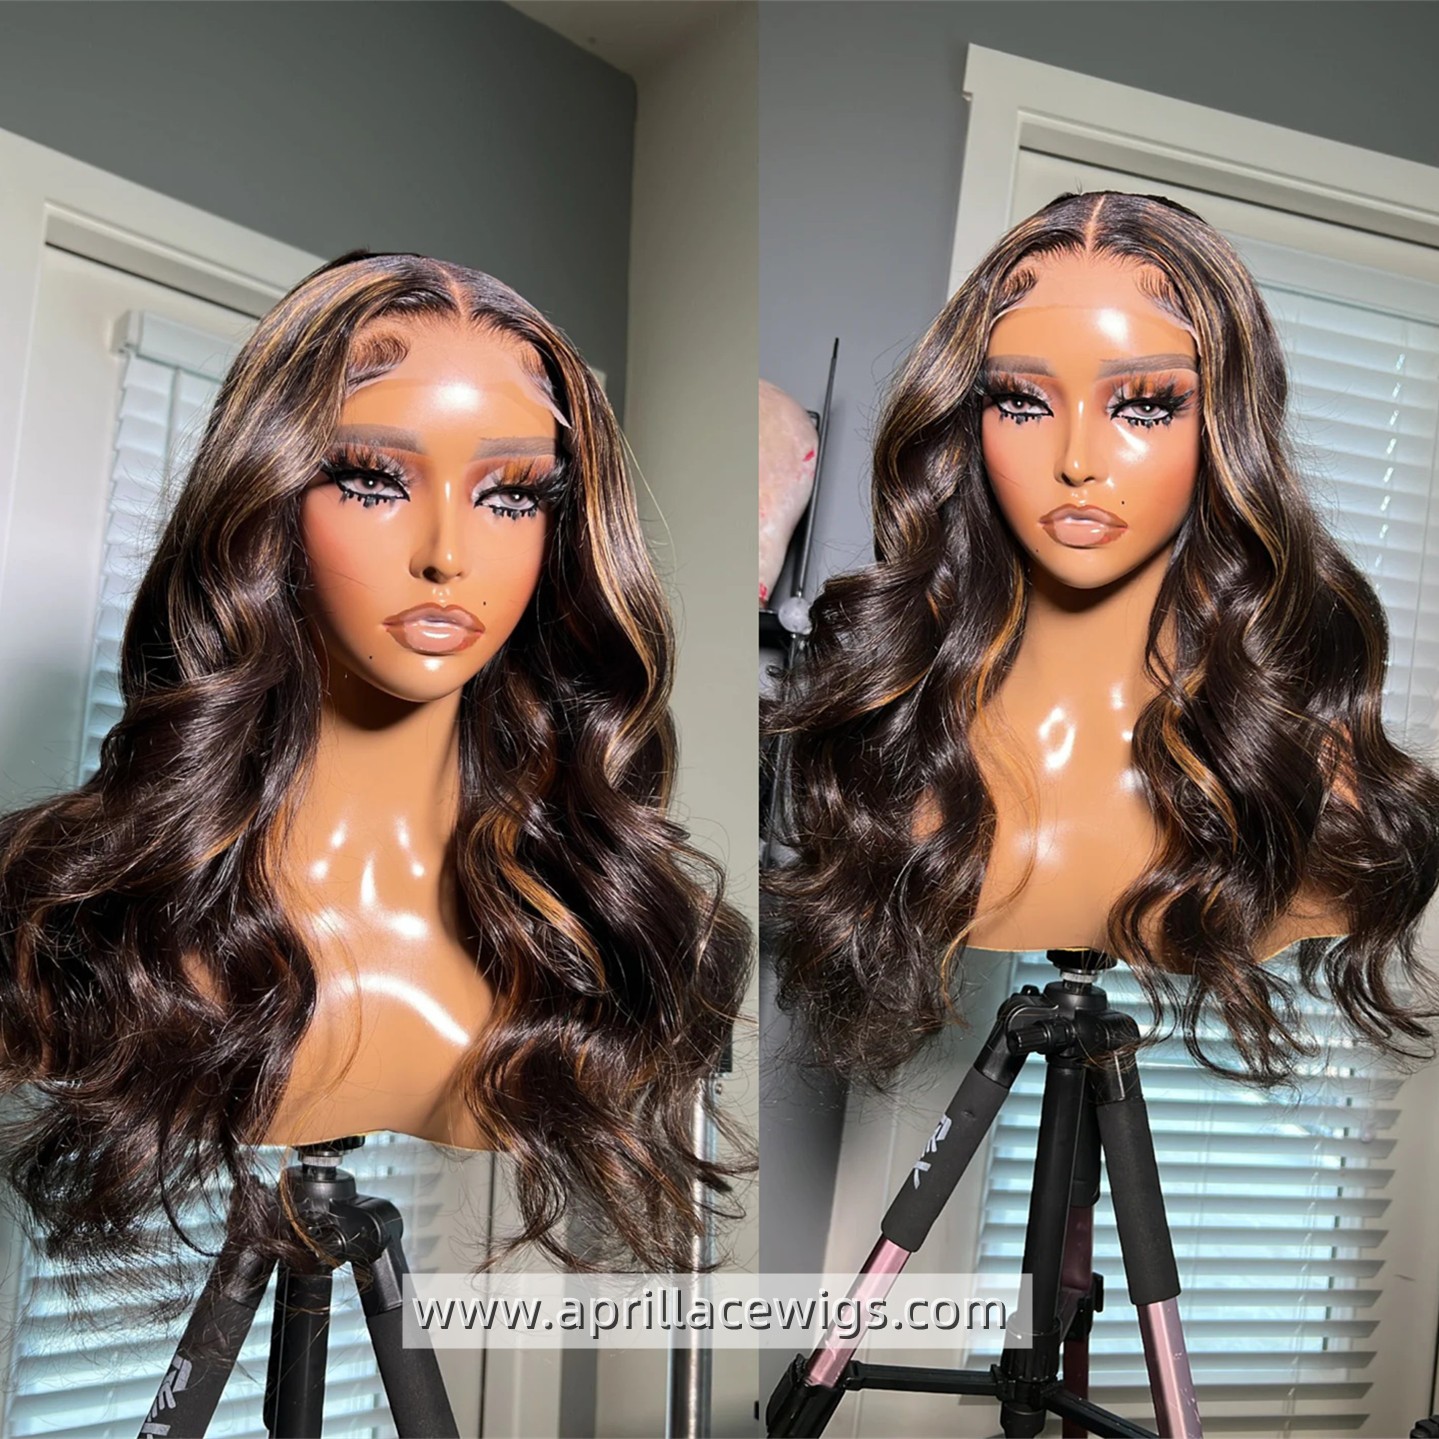 https://www.aprillacewigs.com/lace-front-wigs/799-virgin-human-hair-brown-highlight-wavy-13x6-lace-front-wig-bw1127.html